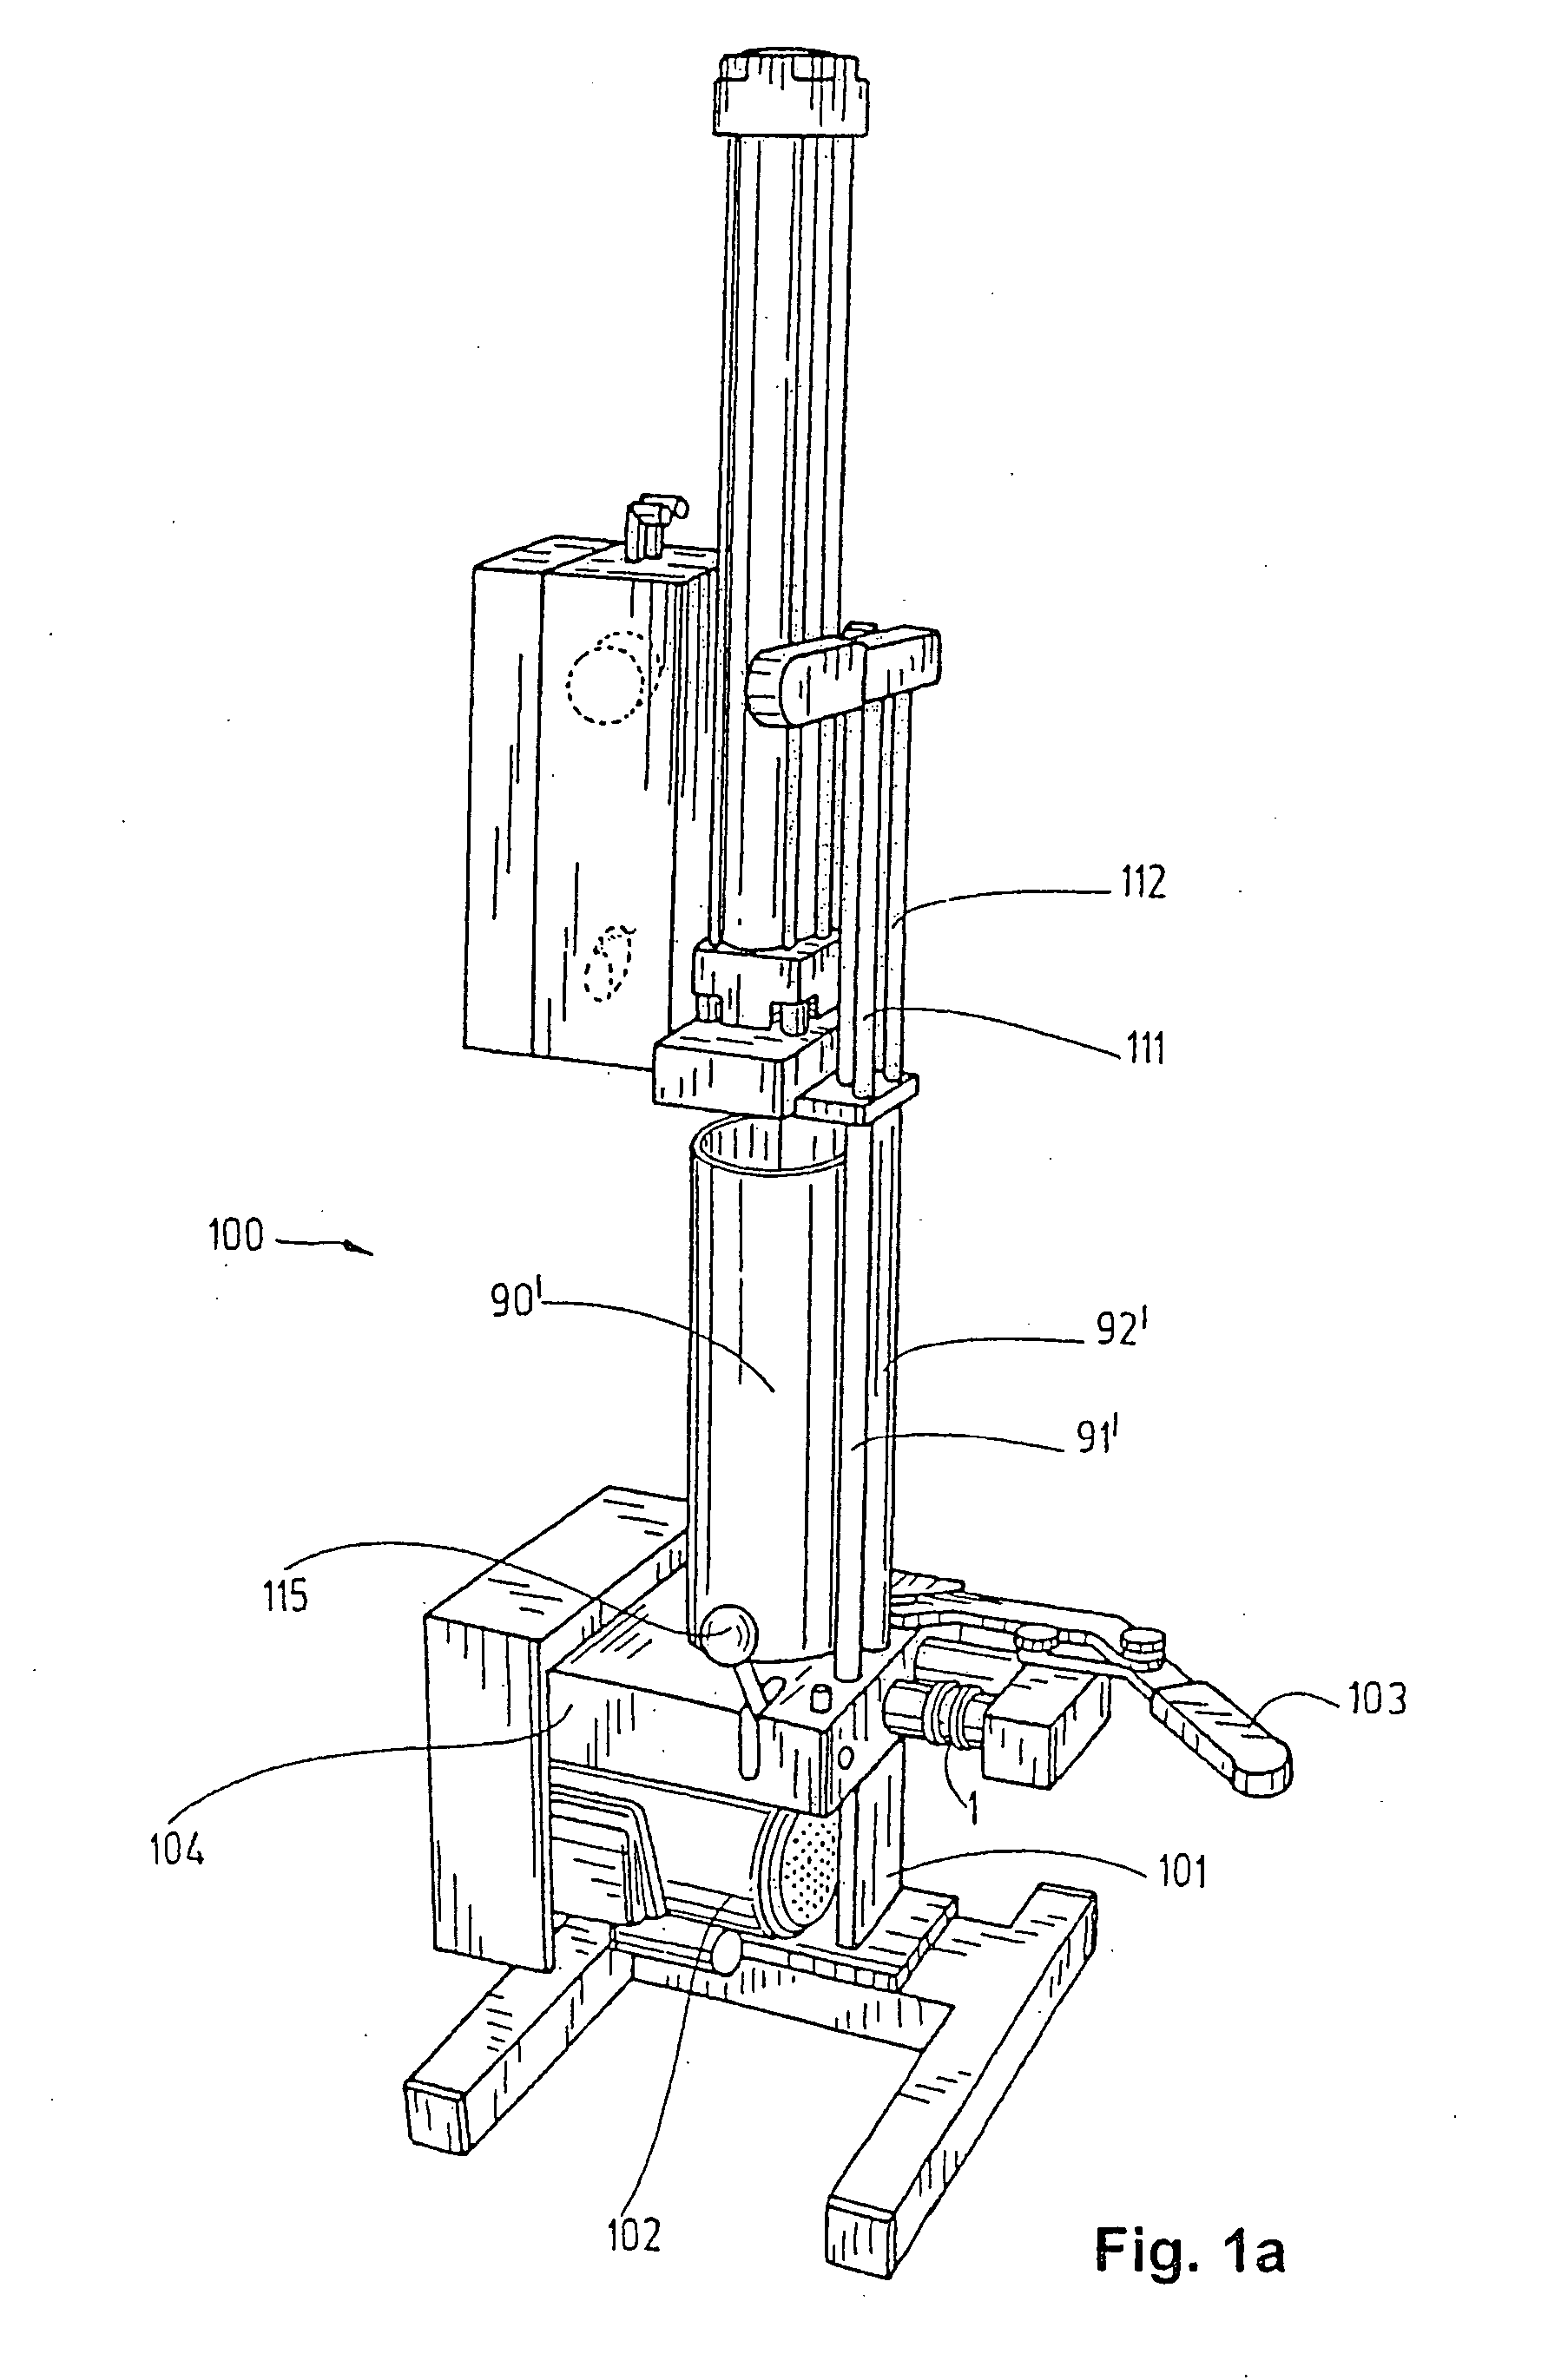 Device for blending a binder component and a hardener component for producing a ready-made filler